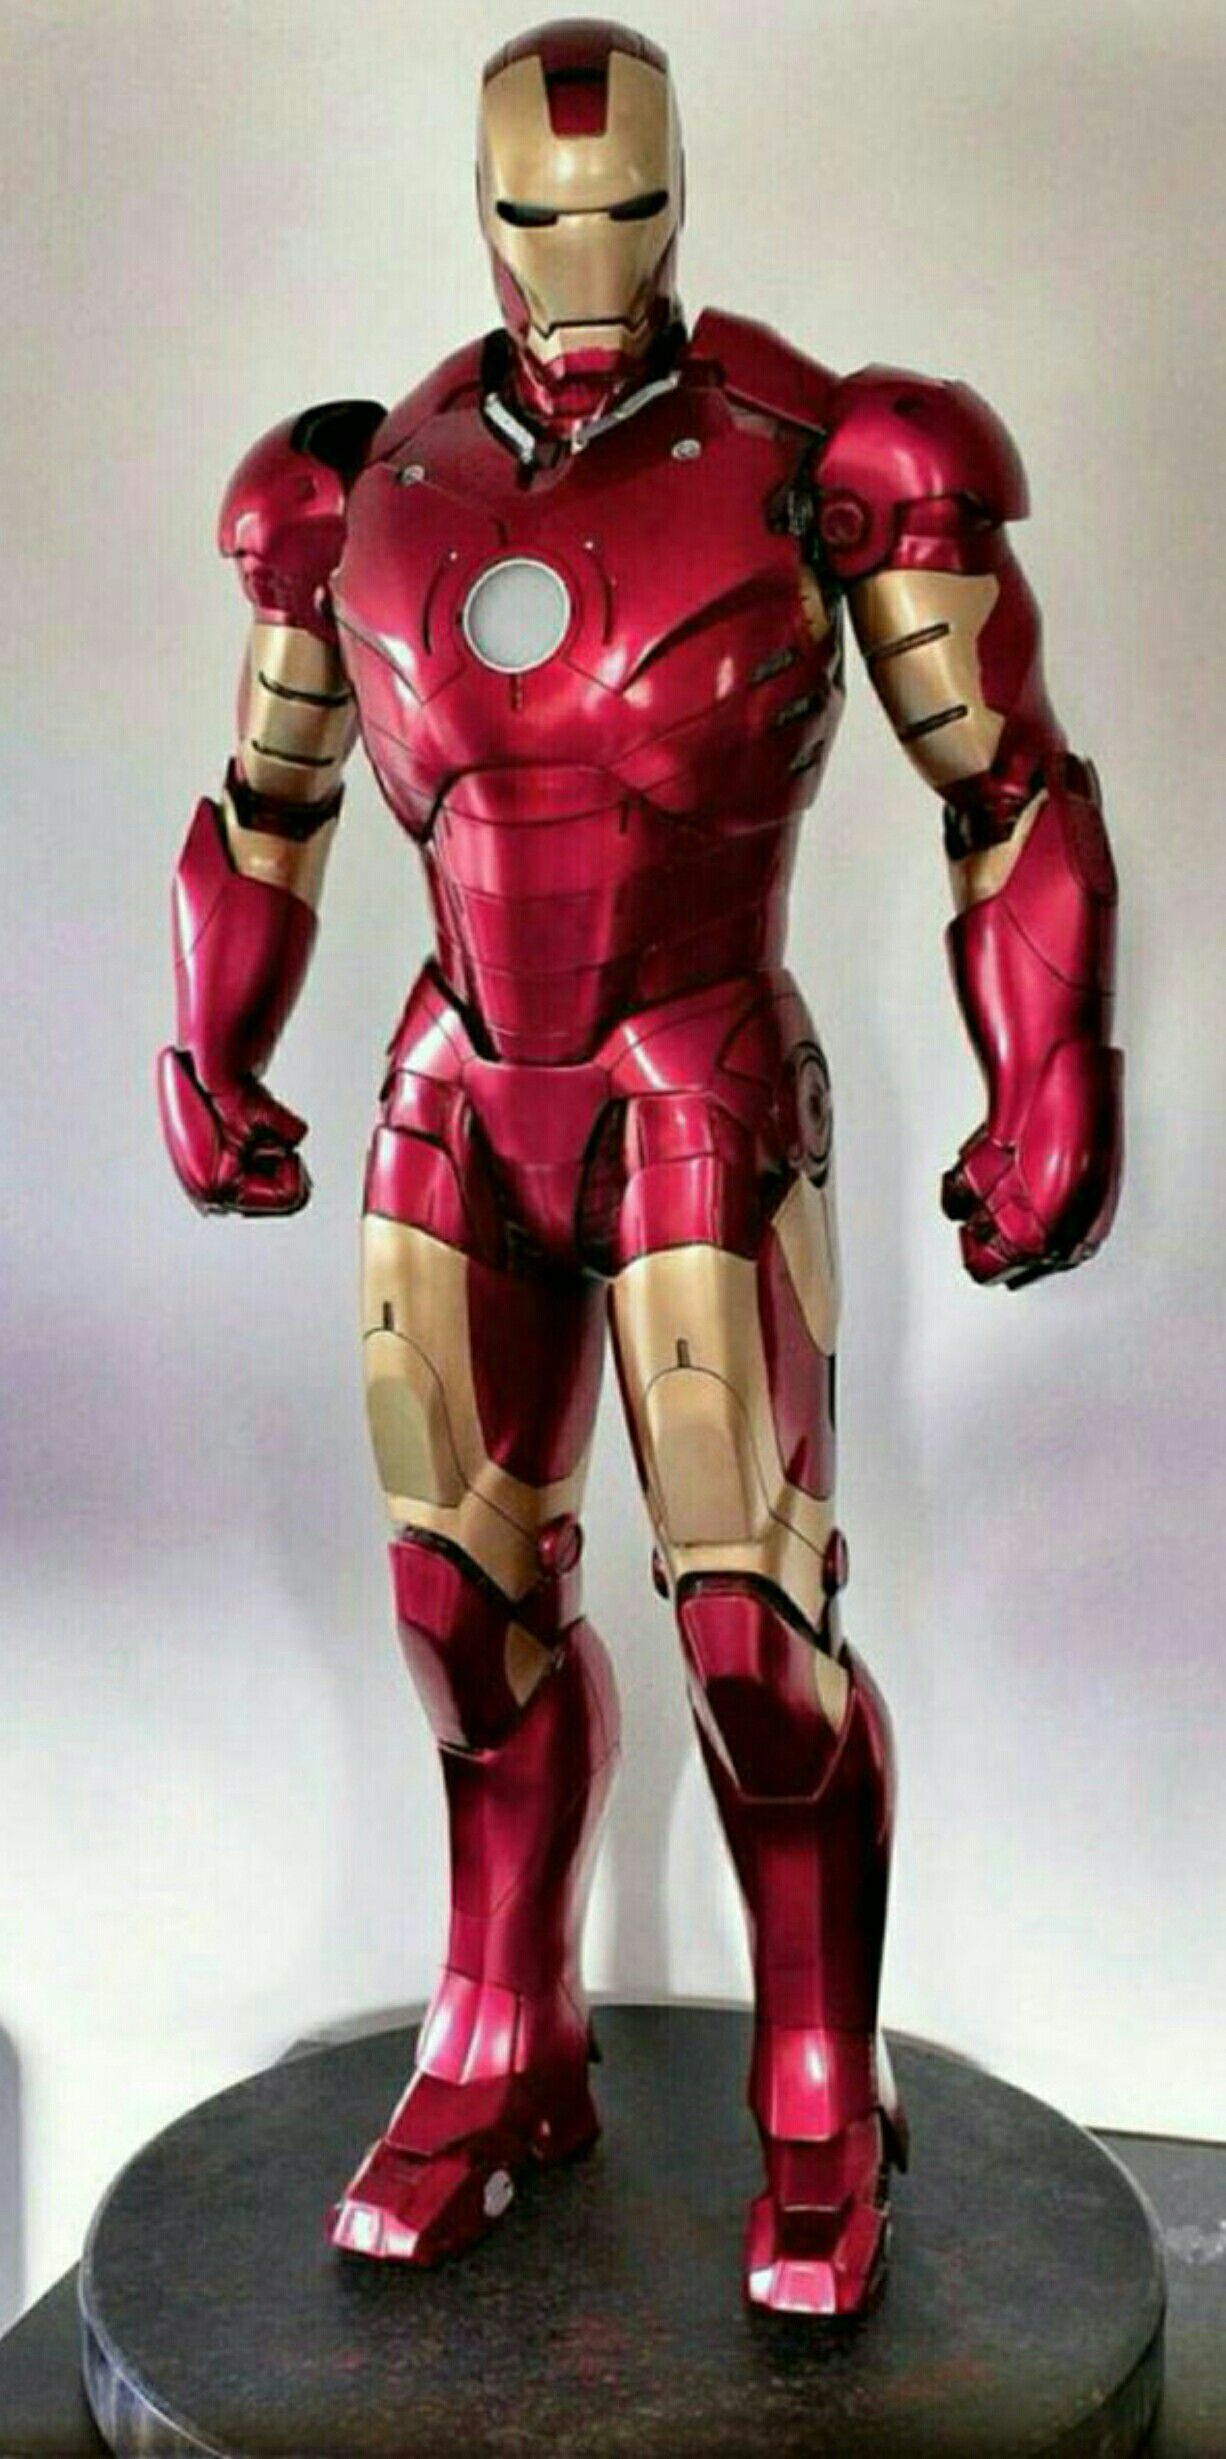 Sideshow Collectibles Marvel Avengers Iron Man Mark III Legendary Scale Statue Maquette